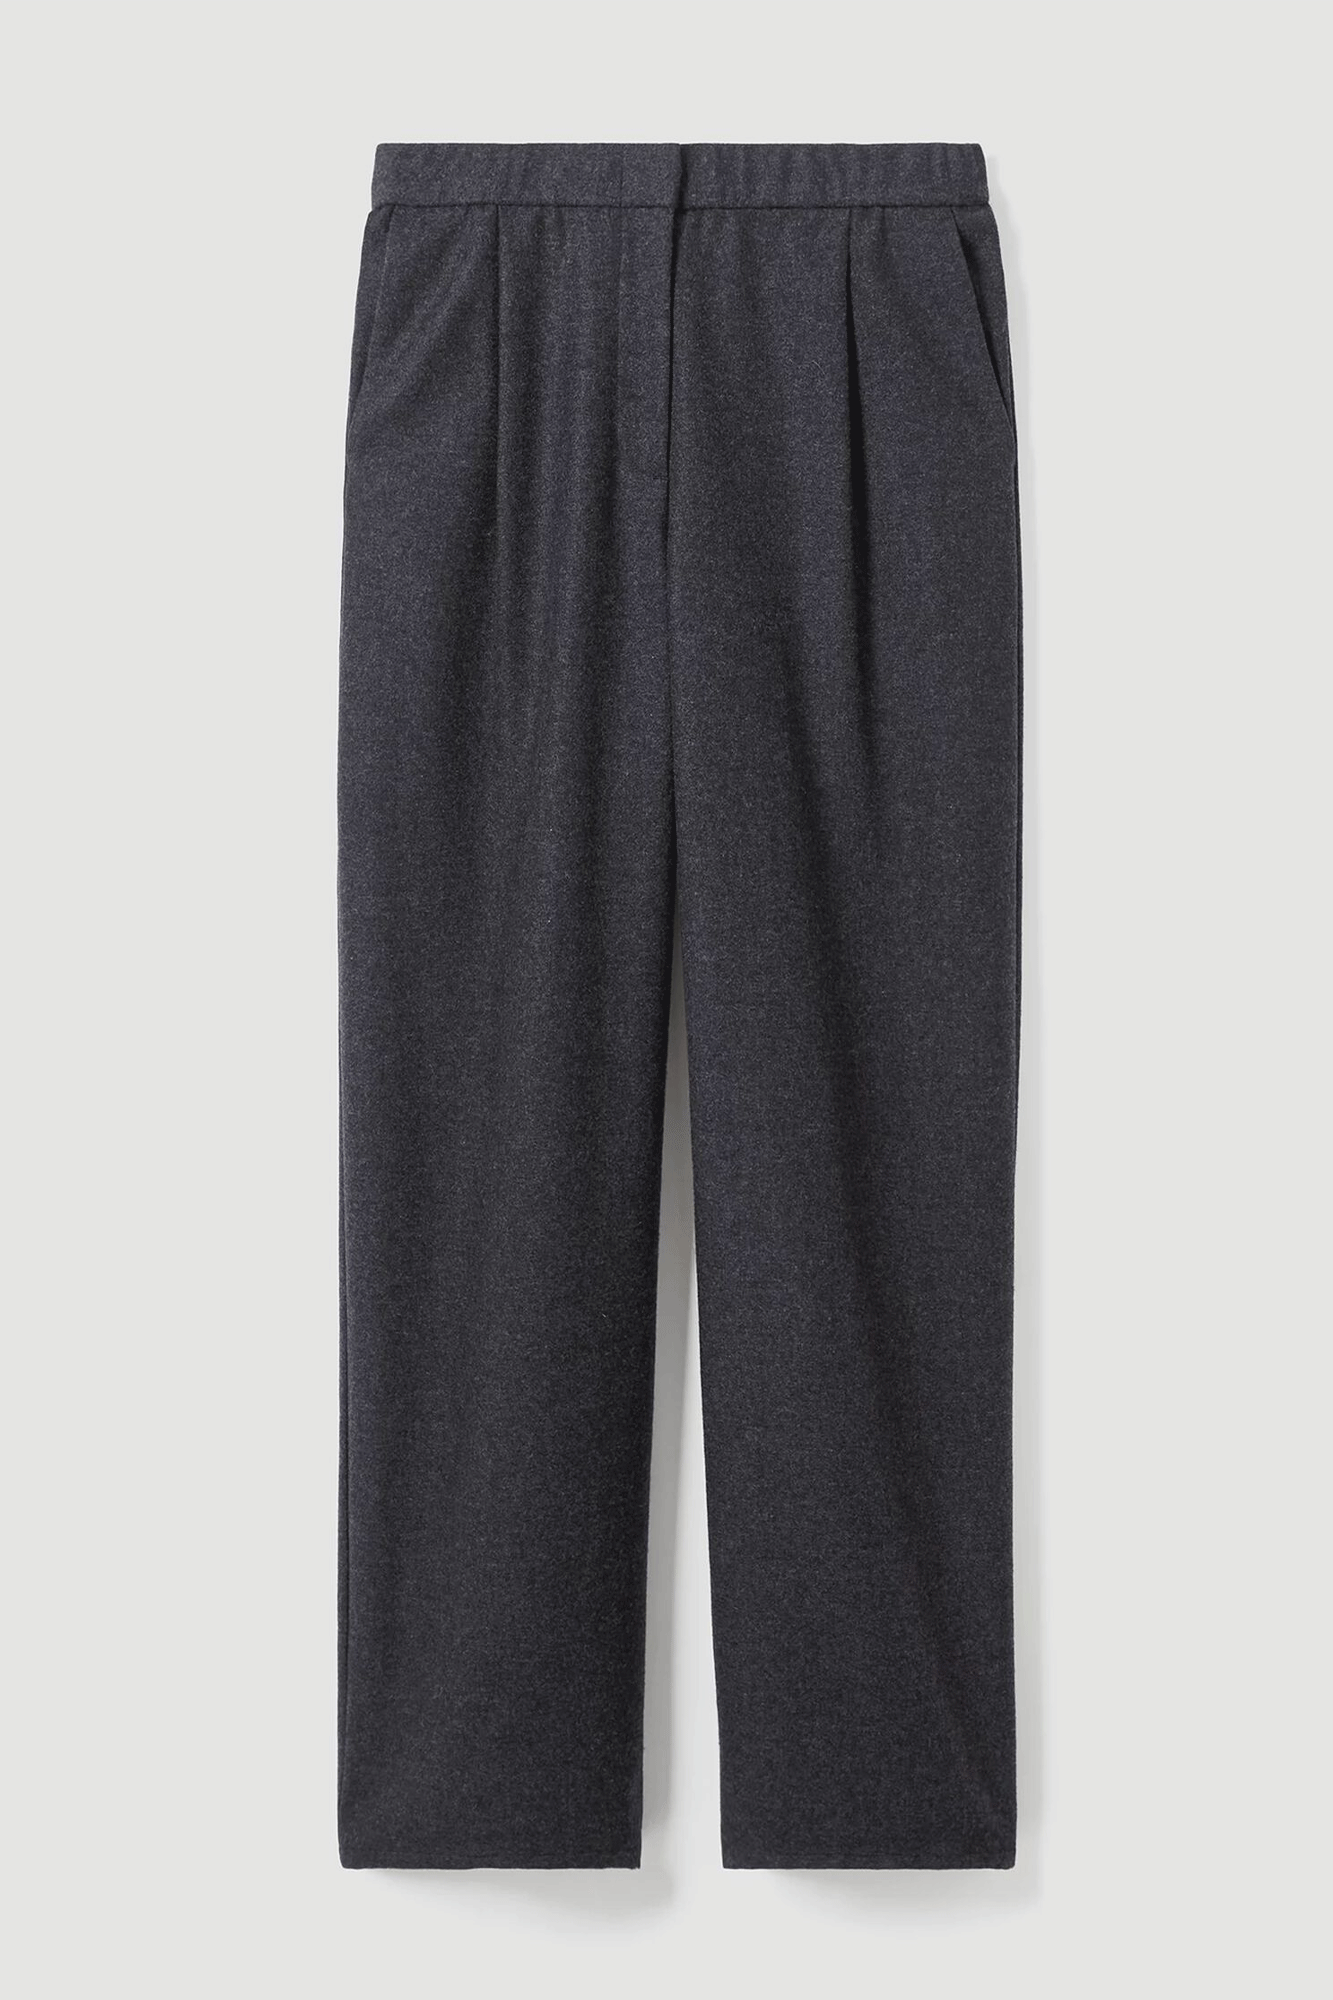 Classic yet modern, these High Waisted Pleated Trousers from Eileen Fisher are an ideal addition to any wardrobe. Crafted from soft wool flannel with an effortless drape, the relaxing wide-leg pants feature an elegant high waist and front pleats. Perfect for any occasion.